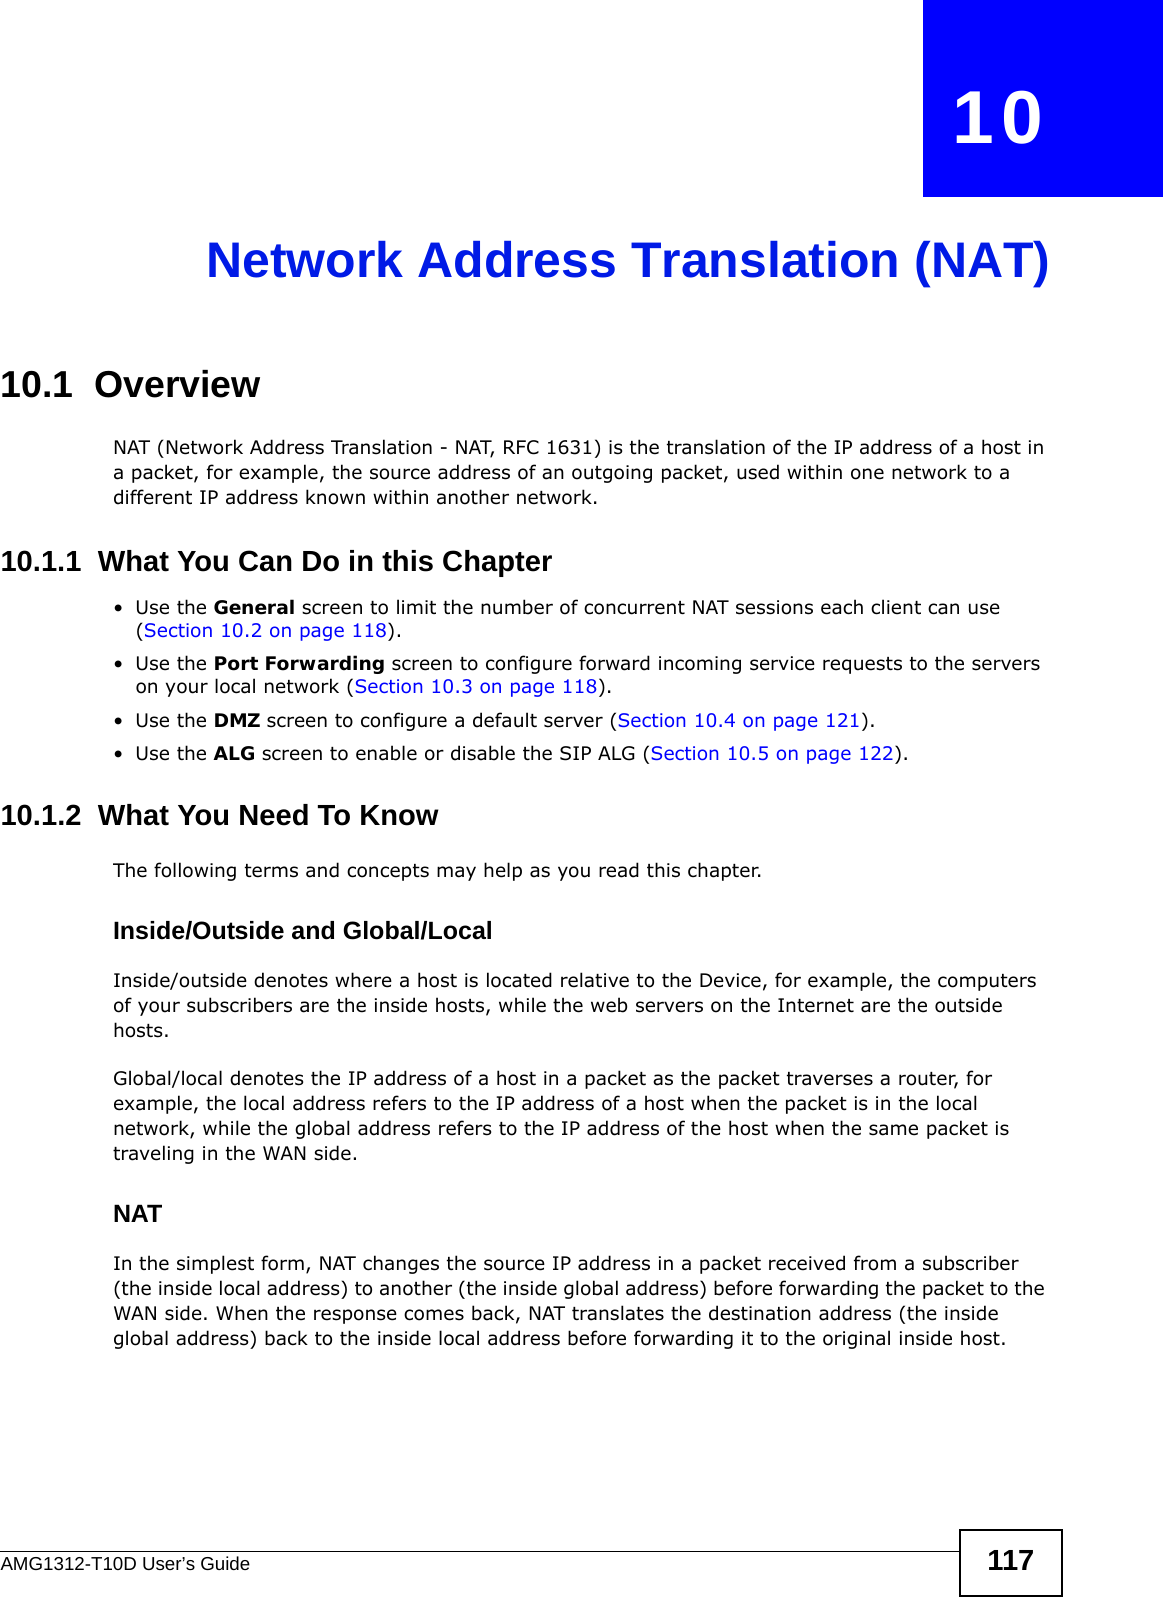 AMG1312-T10D User’s Guide 117CHAPTER   10Network Address Translation (NAT)10.1  Overview NAT (Network Address Translation - NAT, RFC 1631) is the translation of the IP address of a host in a packet, for example, the source address of an outgoing packet, used within one network to a different IP address known within another network.10.1.1  What You Can Do in this Chapter•Use the General screen to limit the number of concurrent NAT sessions each client can use (Section 10.2 on page 118). •Use the Port Forwarding screen to configure forward incoming service requests to the servers on your local network (Section 10.3 on page 118).•Use the DMZ screen to configure a default server (Section 10.4 on page 121).•Use the ALG screen to enable or disable the SIP ALG (Section 10.5 on page 122).10.1.2  What You Need To KnowThe following terms and concepts may help as you read this chapter.Inside/Outside and Global/LocalInside/outside denotes where a host is located relative to the Device, for example, the computers of your subscribers are the inside hosts, while the web servers on the Internet are the outside hosts. Global/local denotes the IP address of a host in a packet as the packet traverses a router, for example, the local address refers to the IP address of a host when the packet is in the local network, while the global address refers to the IP address of the host when the same packet is traveling in the WAN side. NATIn the simplest form, NAT changes the source IP address in a packet received from a subscriber (the inside local address) to another (the inside global address) before forwarding the packet to the WAN side. When the response comes back, NAT translates the destination address (the inside global address) back to the inside local address before forwarding it to the original inside host.